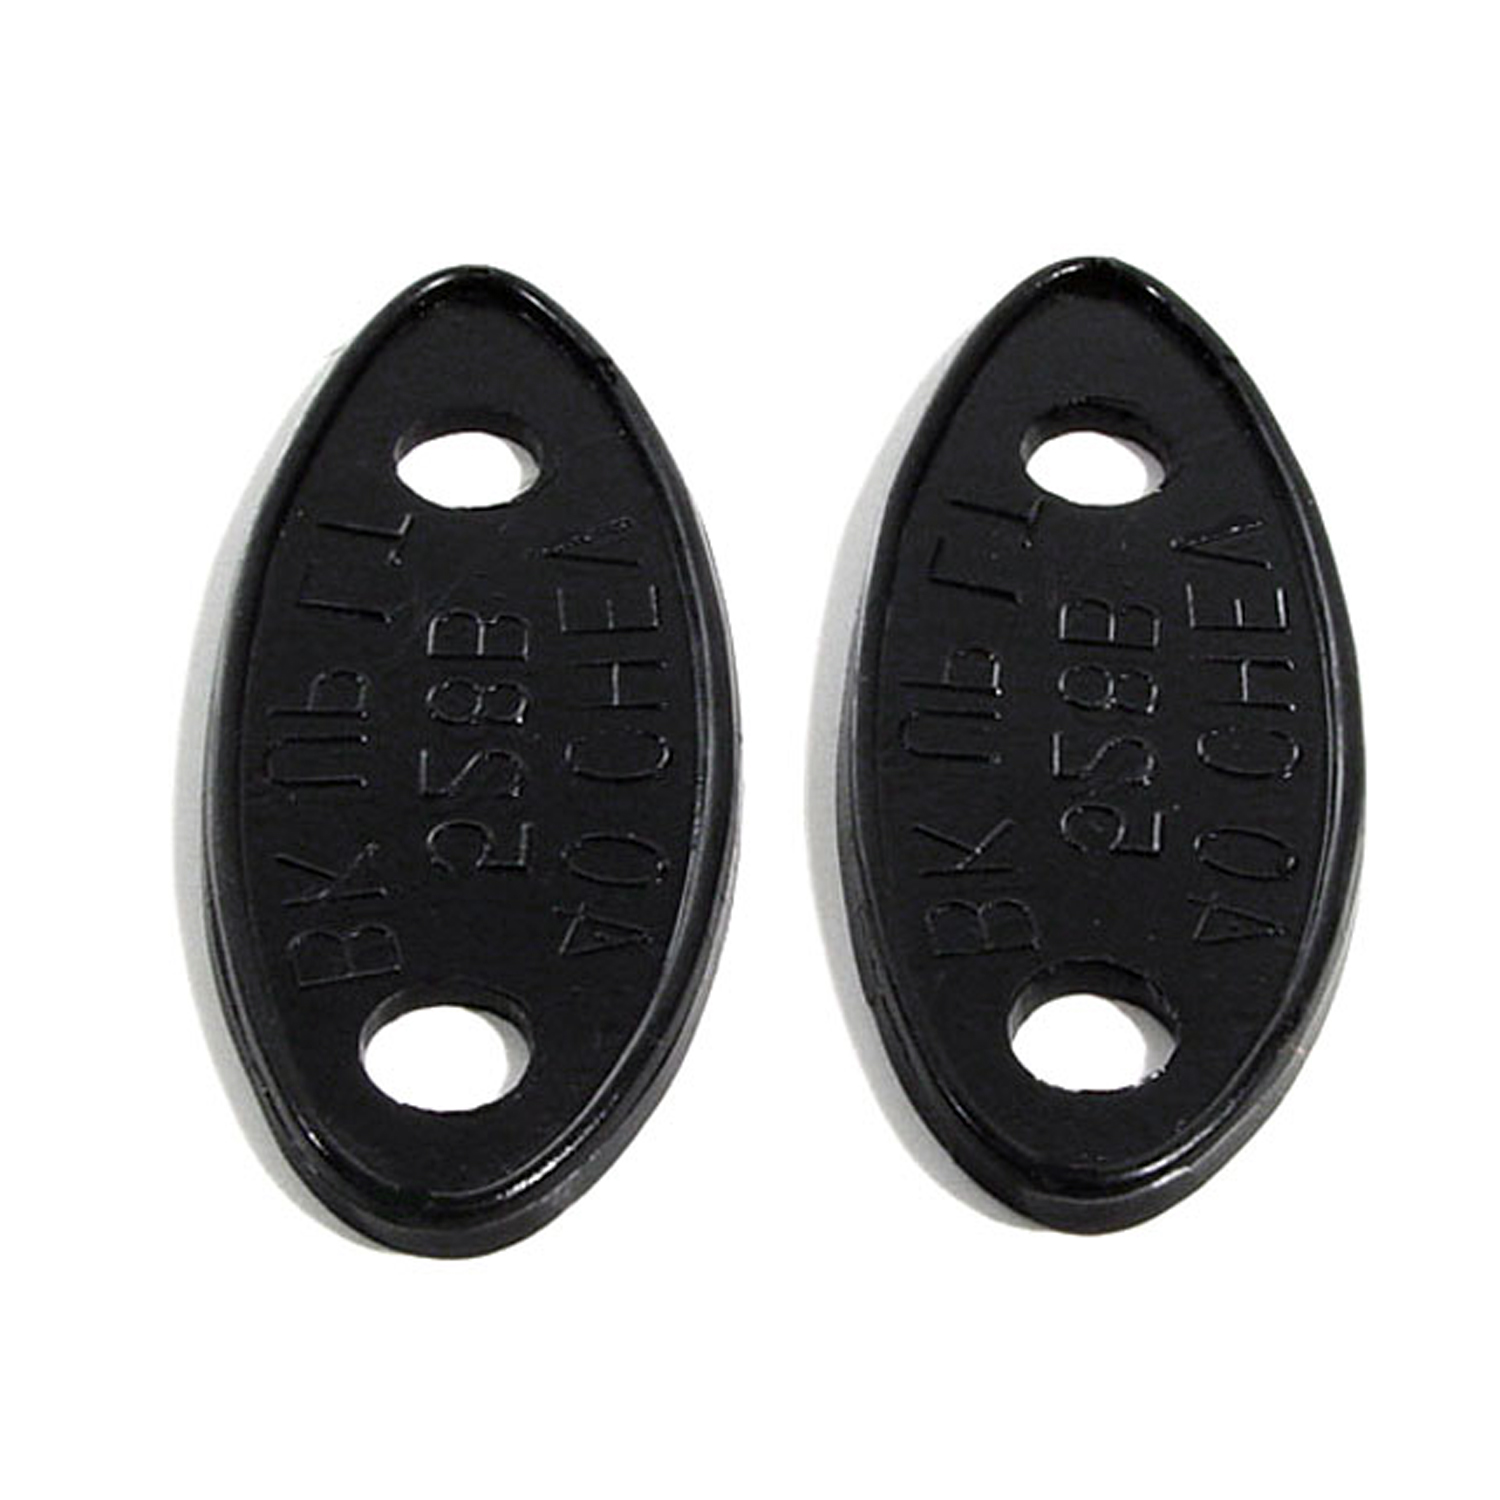 1940 Chevrolet Special Deluxe Back-Up Light Pads.  1-1/8 wide X 2-3/4 long.  Pair-MP 528-B